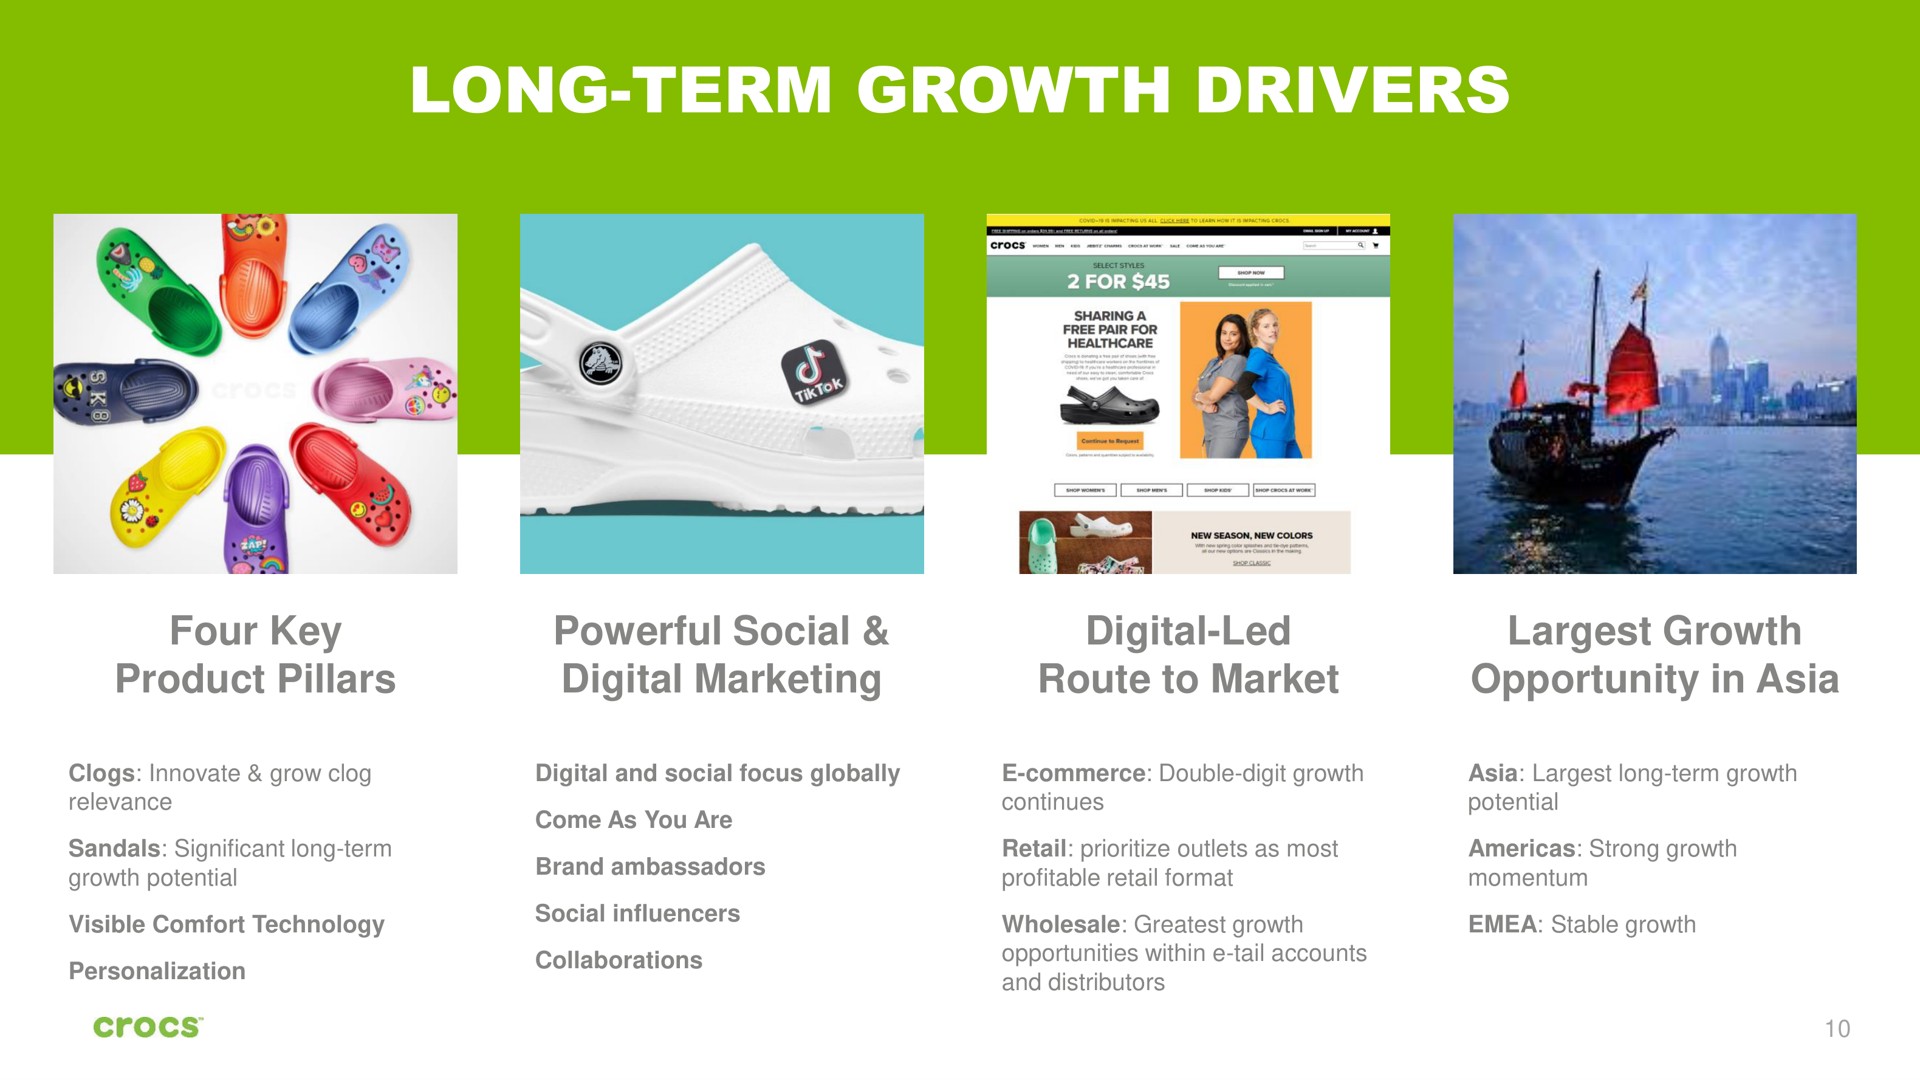 long term growth drivers four key product pillars powerful social digital marketing digital led route to market opportunity in | Crocs